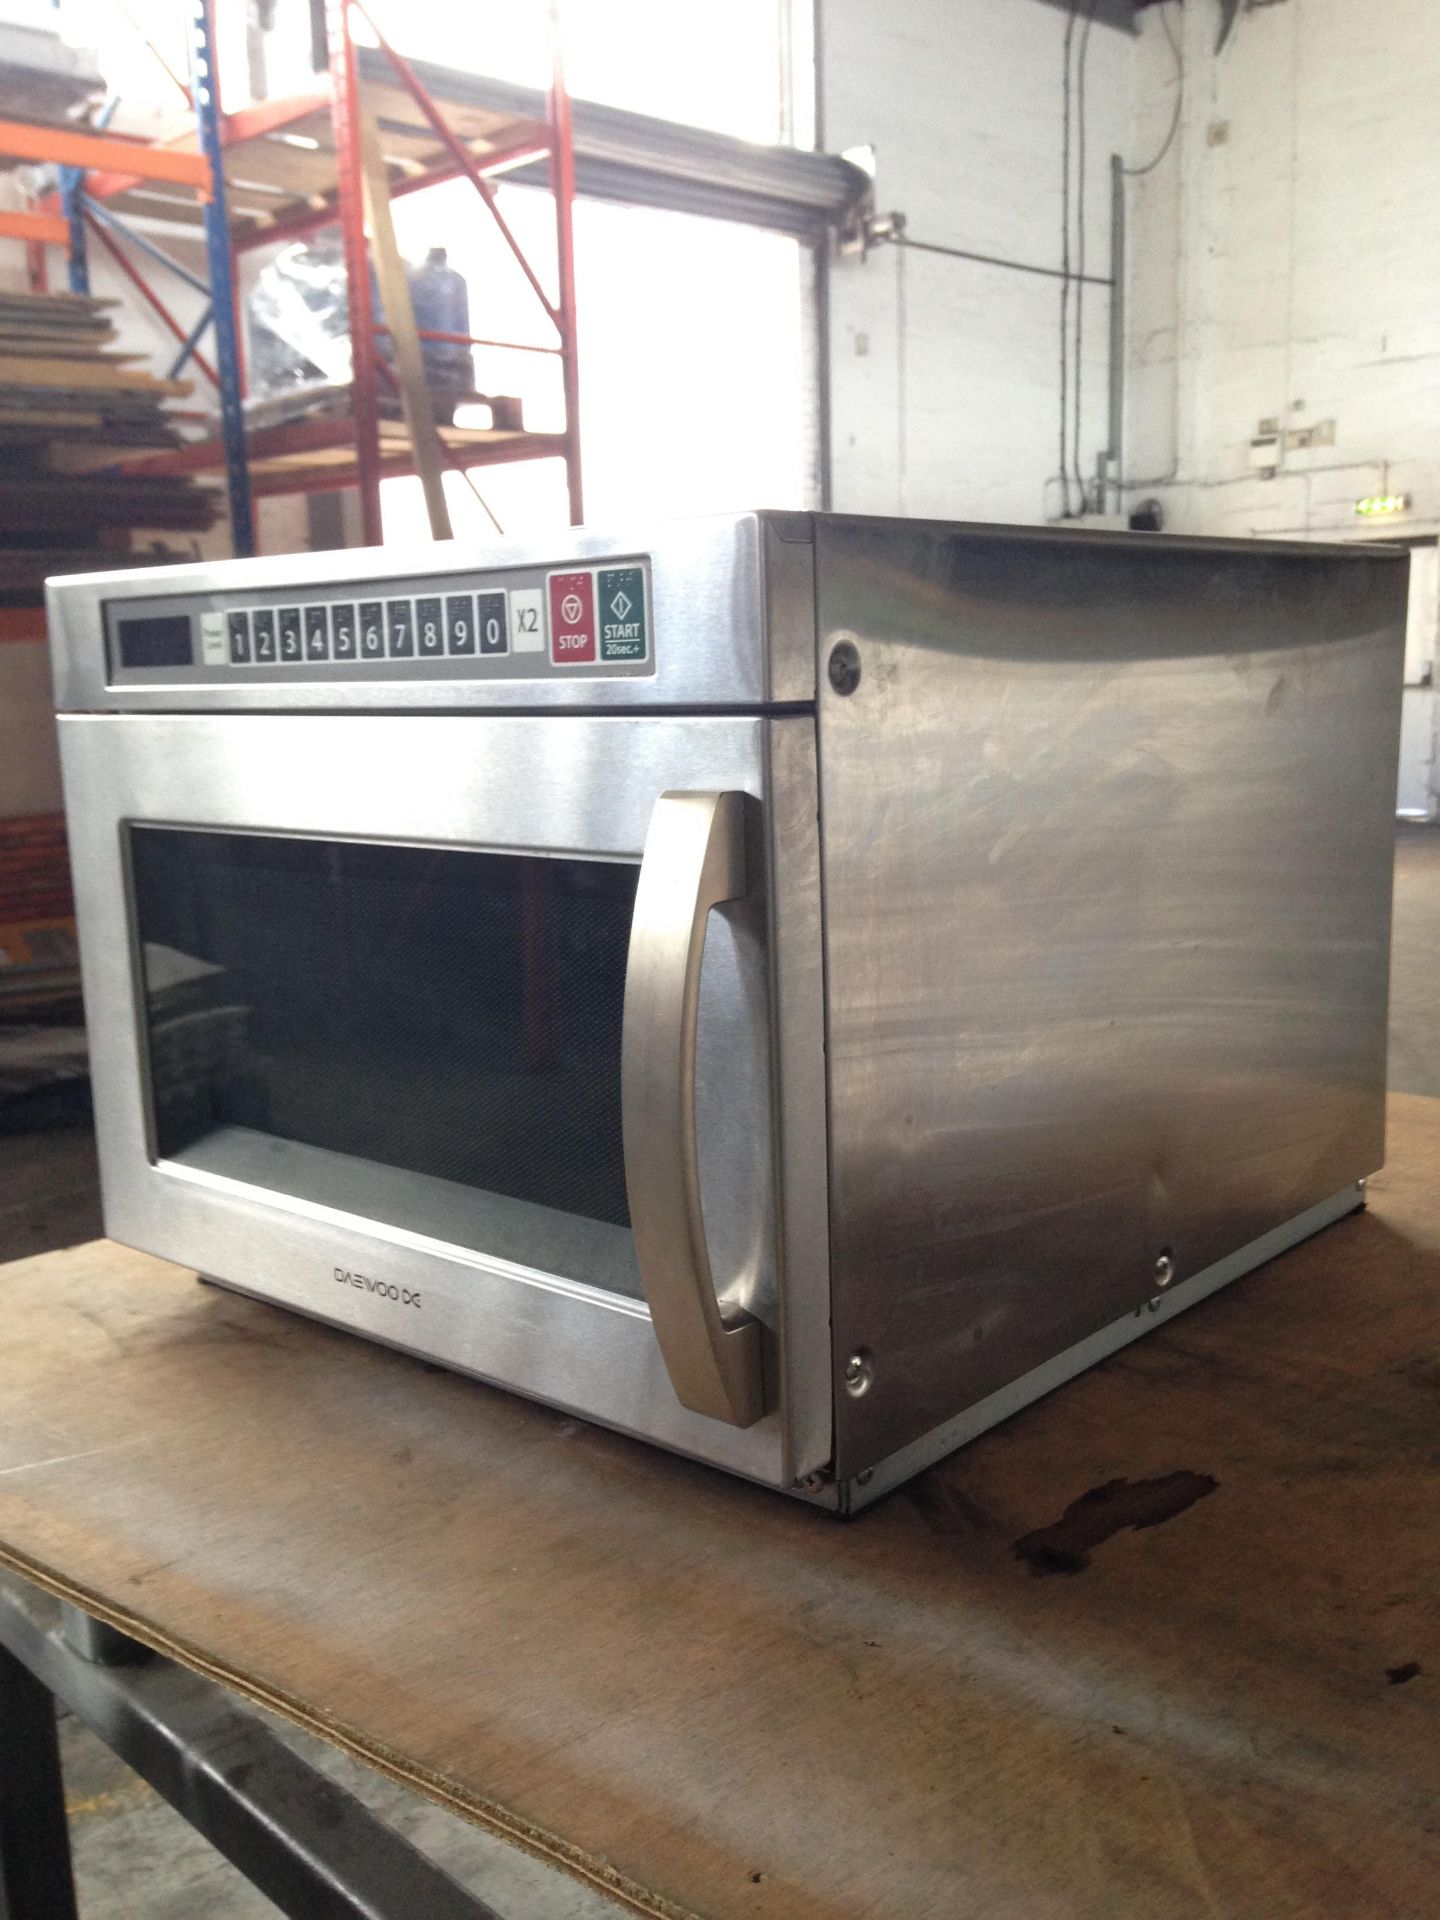 DAEWOO KOM9F50 COMMERCIAL MICROWAVE: 13 amp supply: Stainless Steel Cavity with 27 litre capacity an